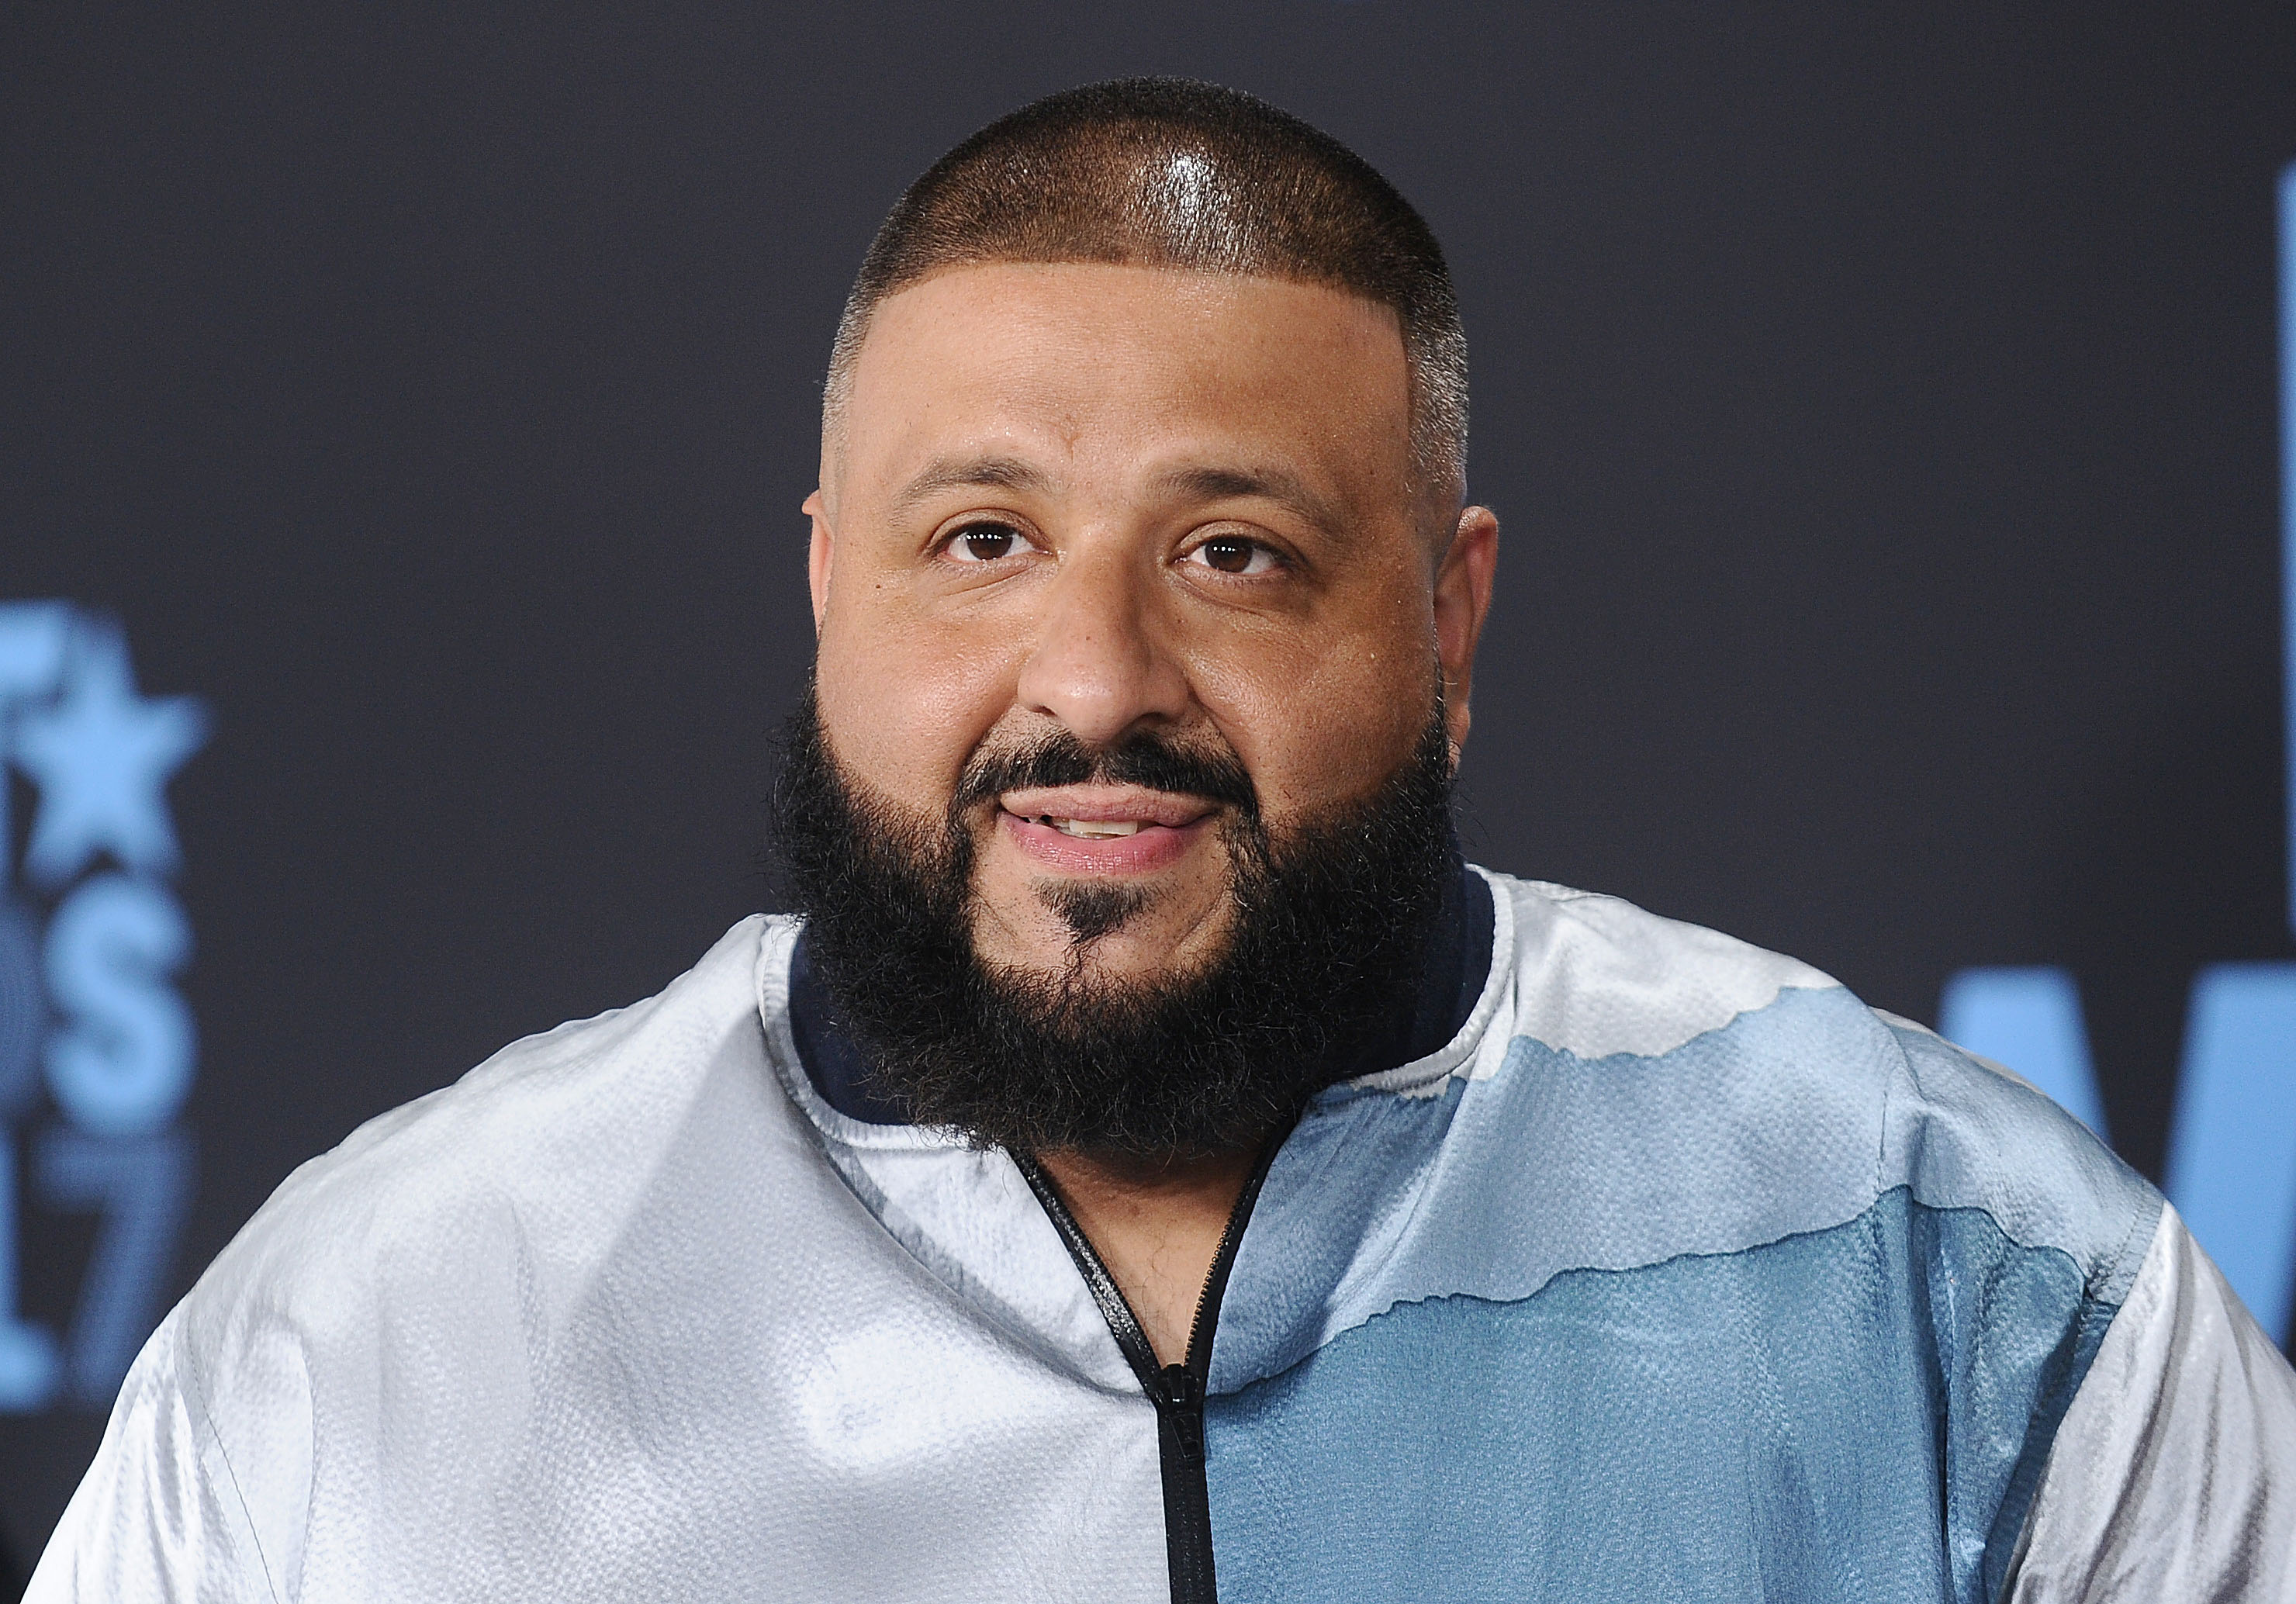 DJ Khaled poses at the 2017 BET Awards on June 25, 2017 in Los Angeles, California. | Source: Getty Images